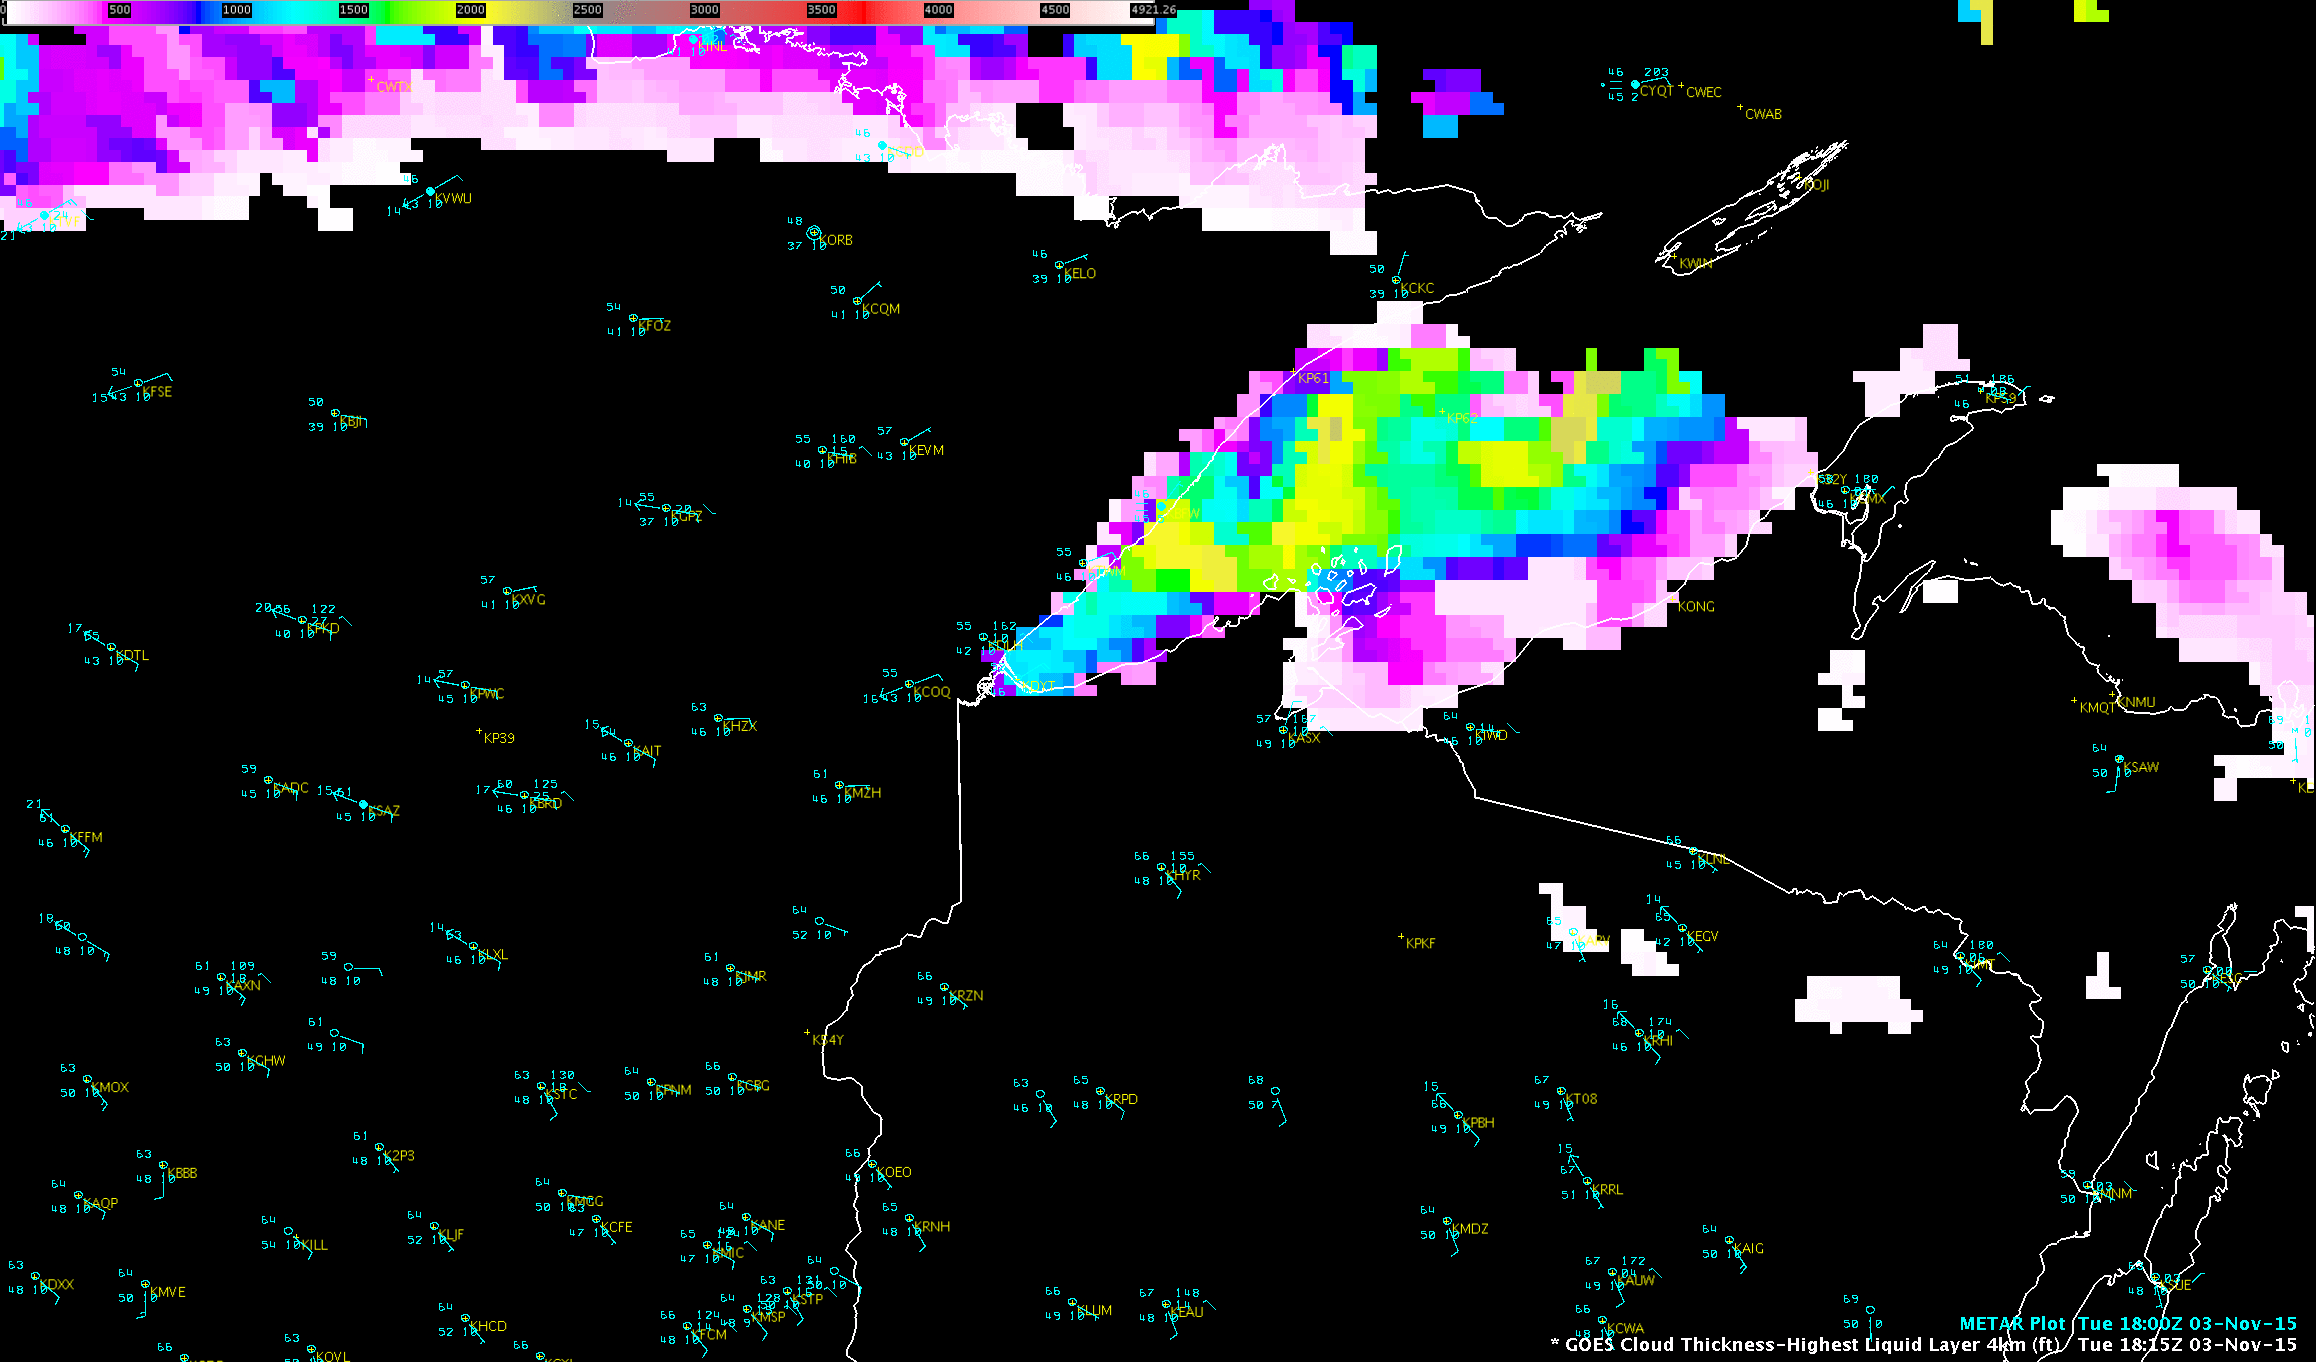 GOES-13 Low Cloud Thickness product [click to enlarge]